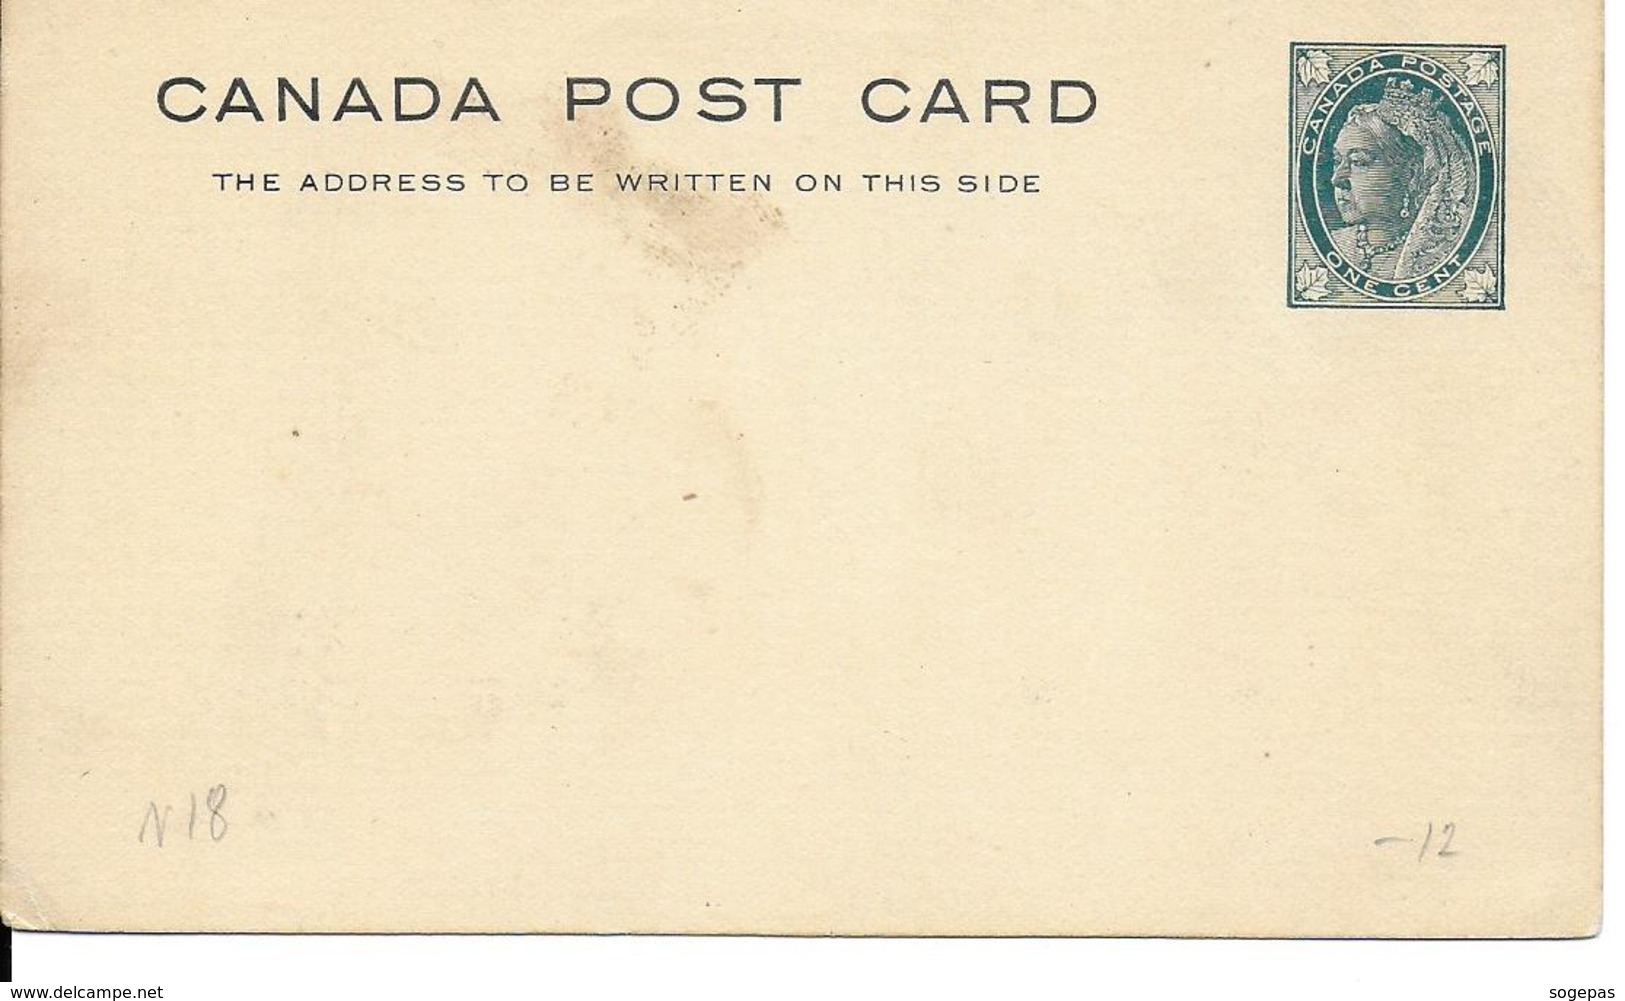 CANADA POST CARD ONE CENT - 1860-1899 Reign Of Victoria